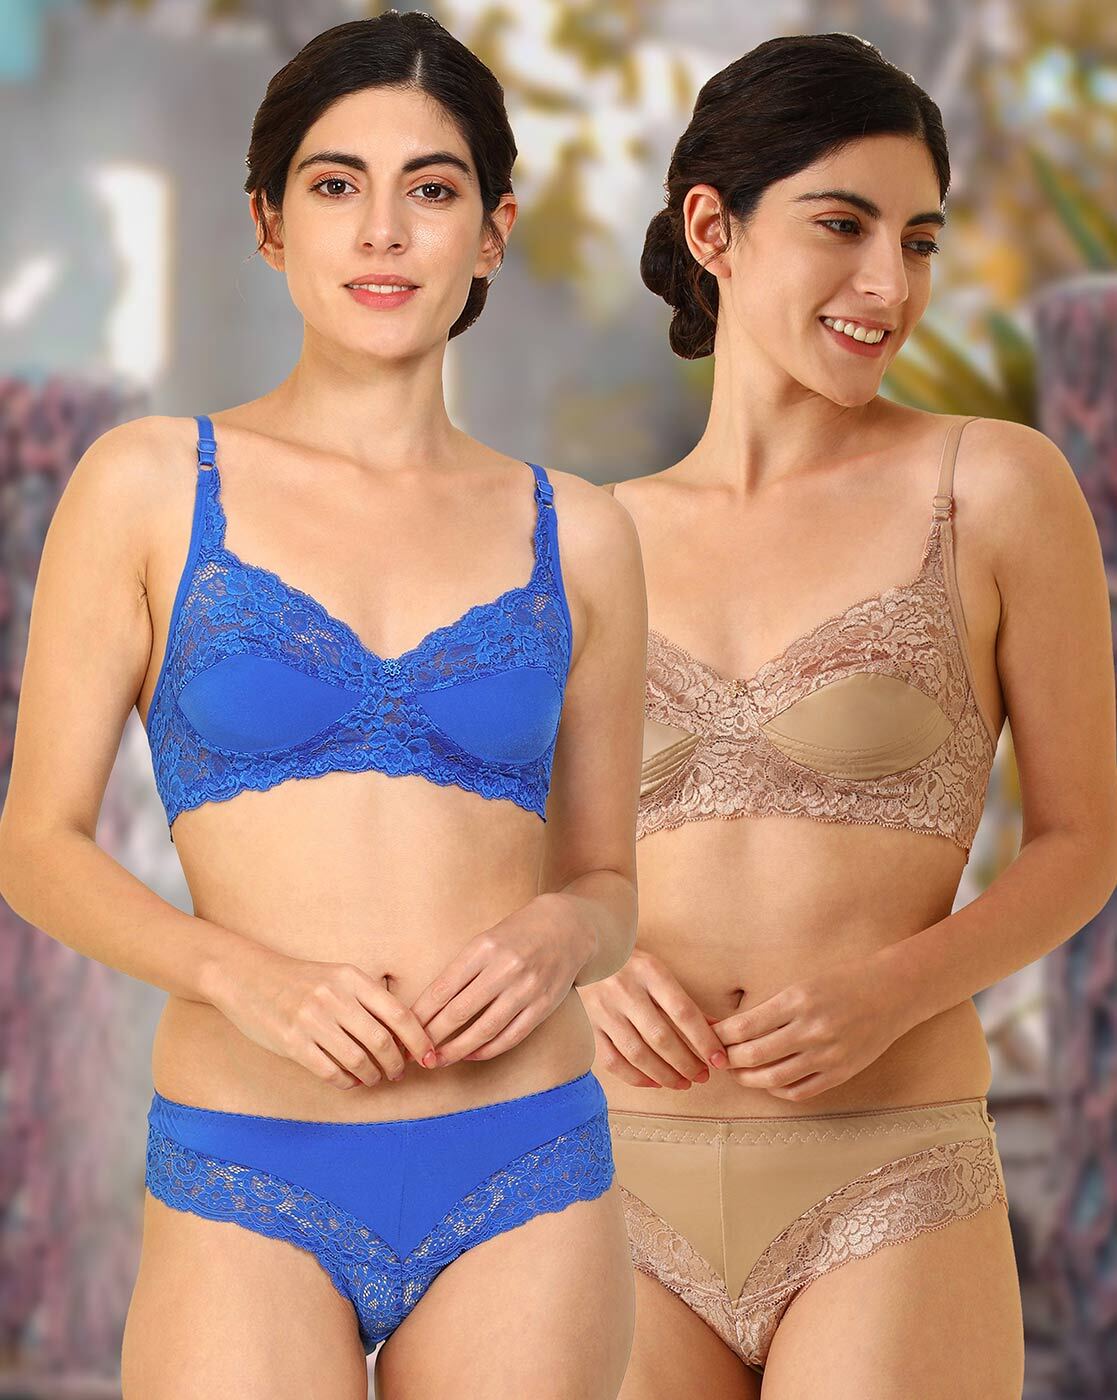 Buy Assorted Lingerie Sets for Women by In-curve Online